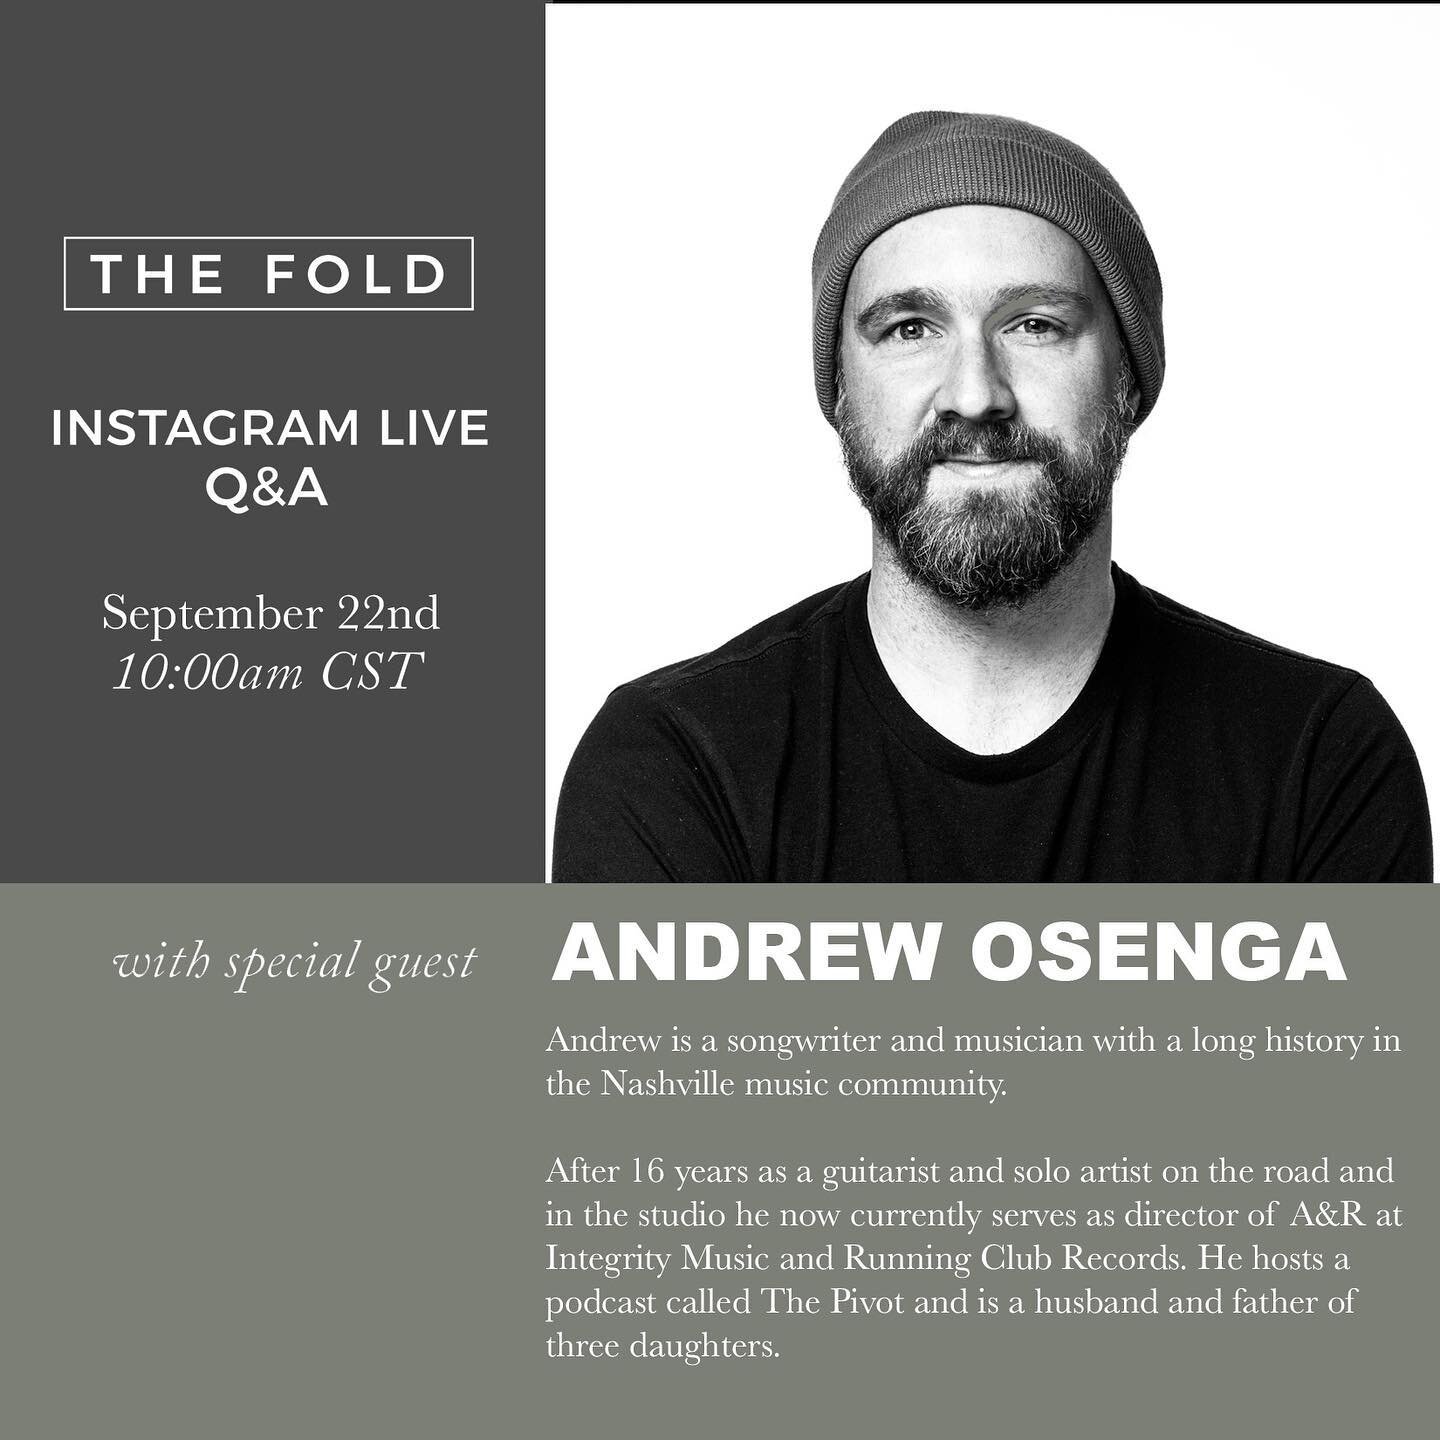 Tomorrow morning we are BACK with another Live Q&amp;A! @itslesliejordan will be joined by @andrewosenga at 10am, and it&rsquo;s going to be a great time. Andrew is a master of many arts and is a well of wisdom, so make sure you tune in! See you ther